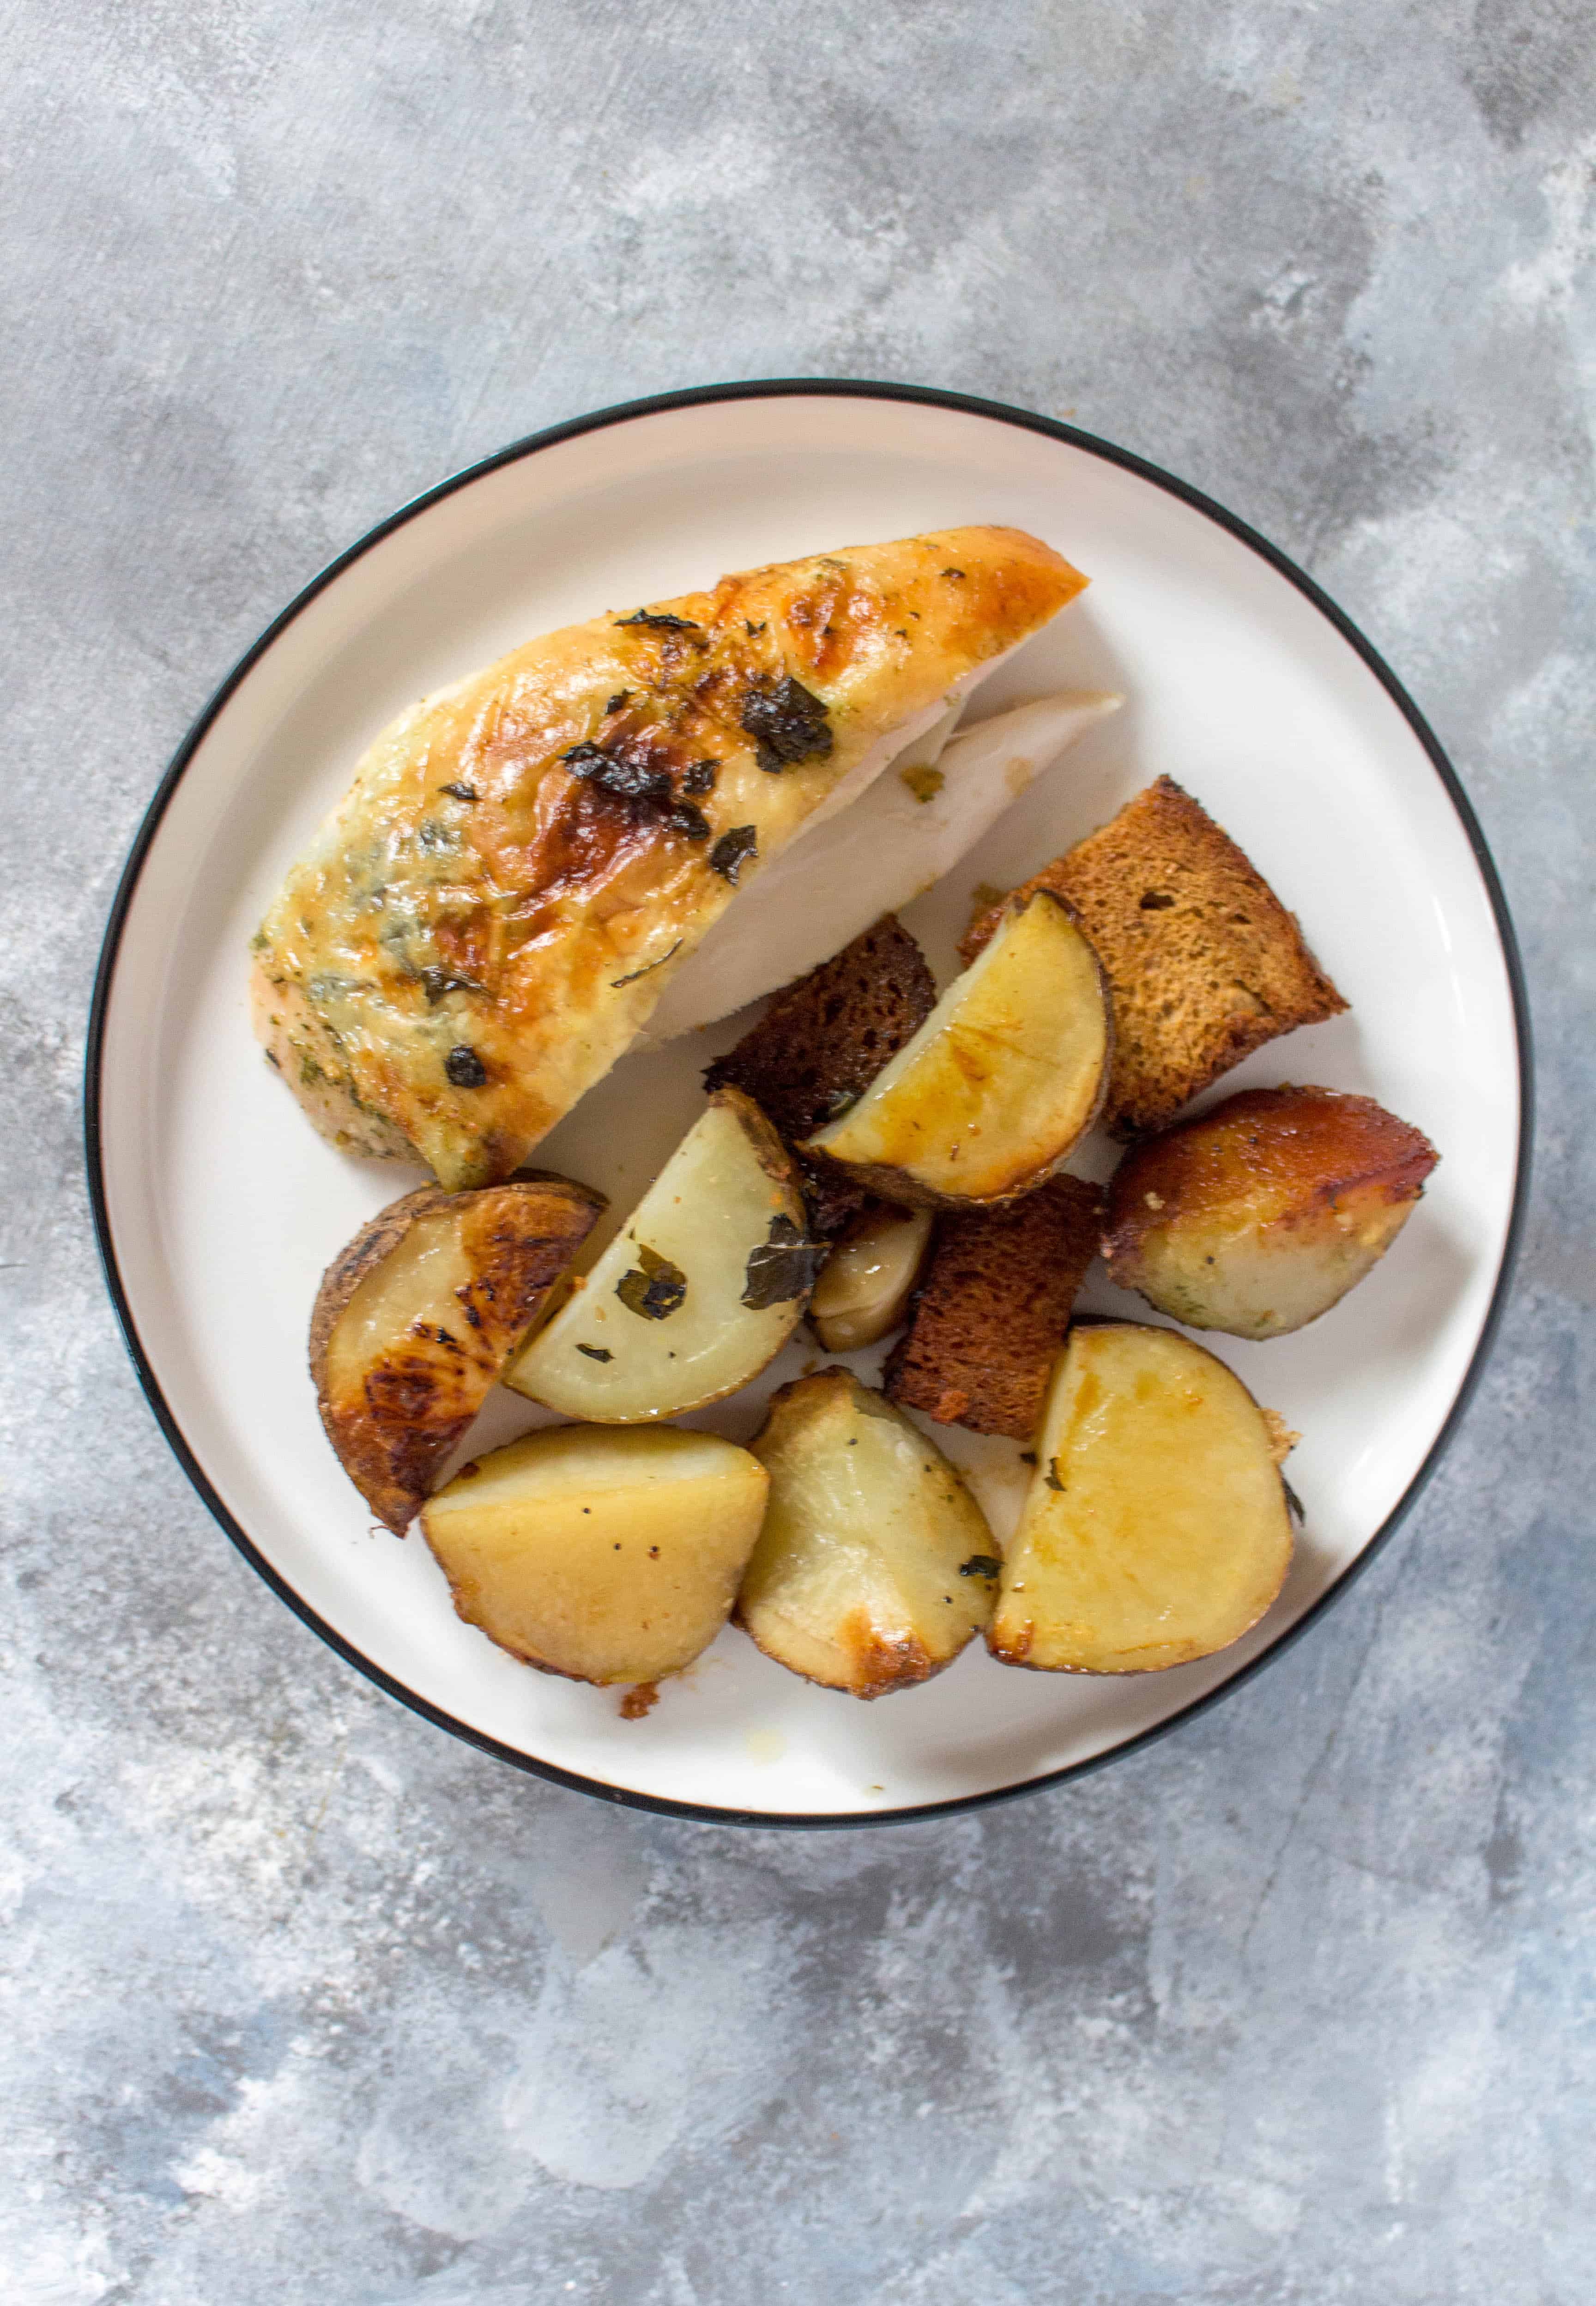 A plate with a slice of dutch oven roasted chicken with potatoes and crispy bread.